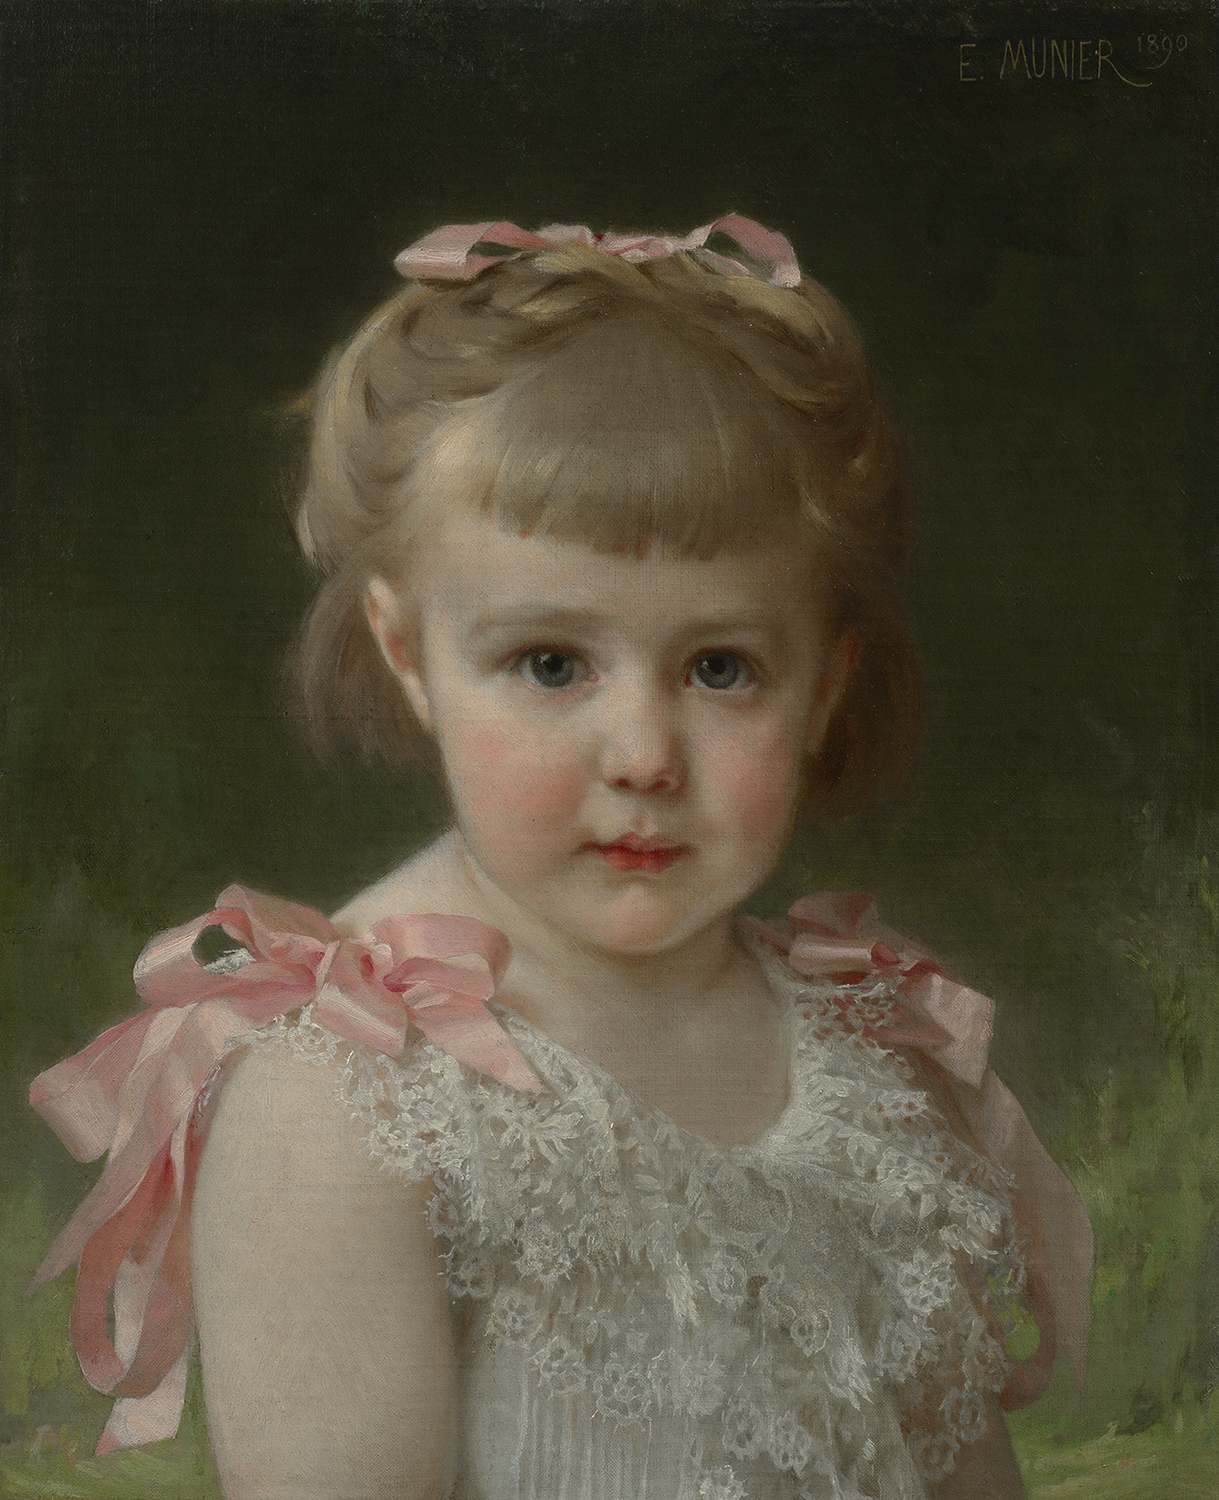 portrait of a young girl in a white dress - email munier